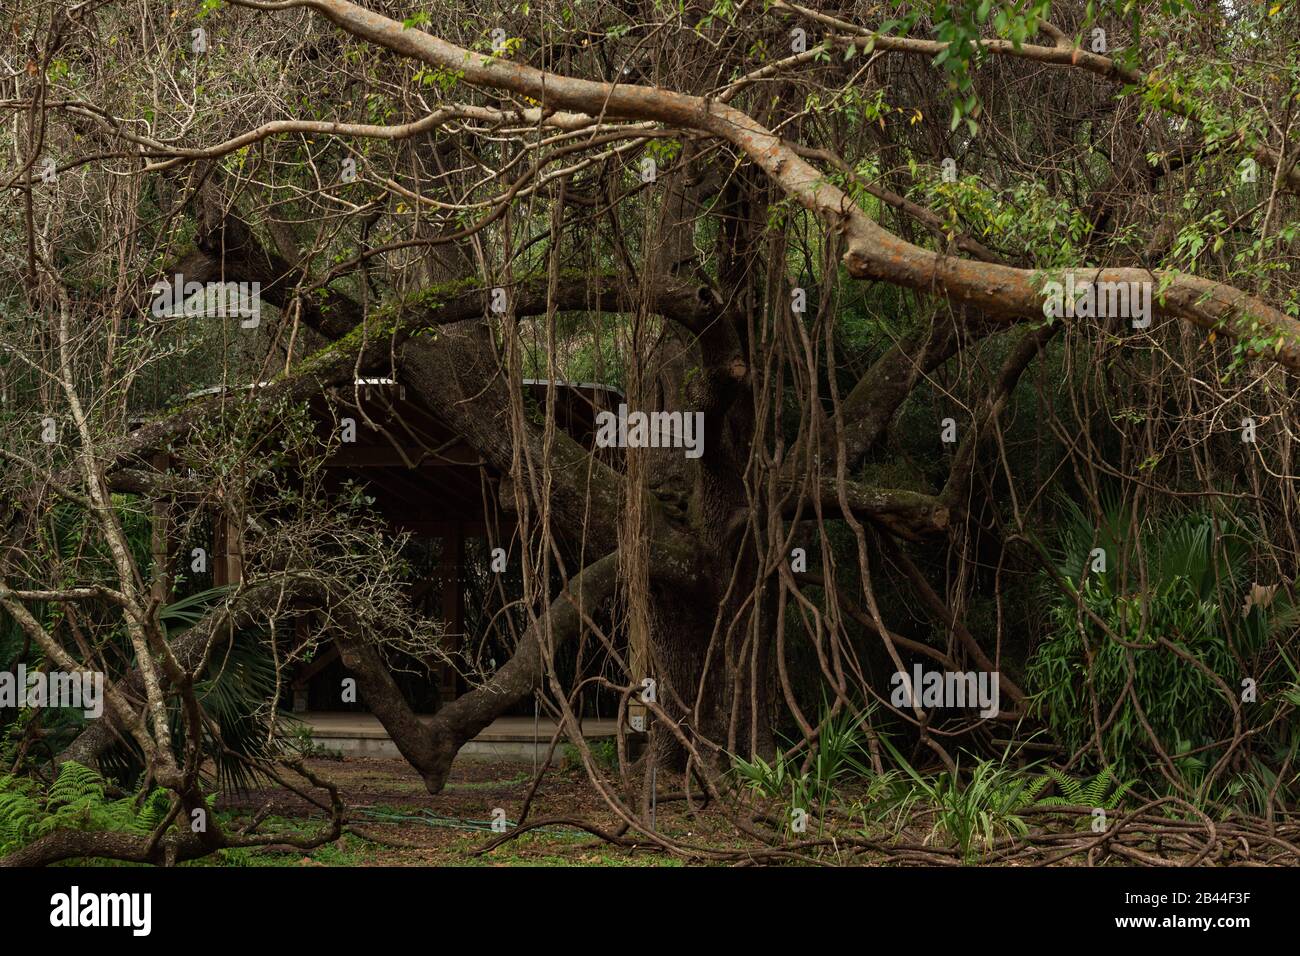 Big dense tree in a botanical garden with long vines. Stock Photo